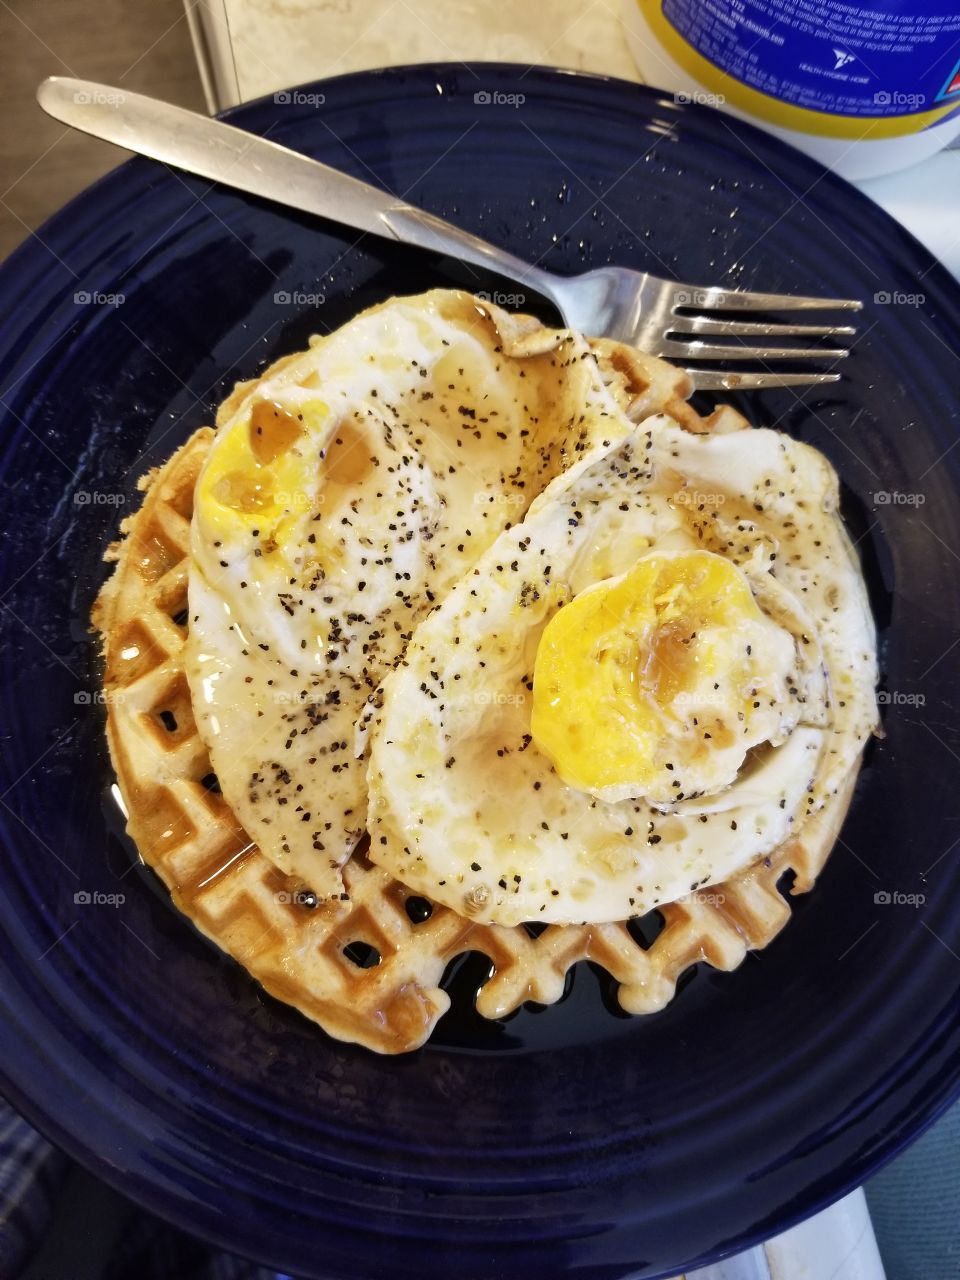 Fried Eggs over Waffle with fork